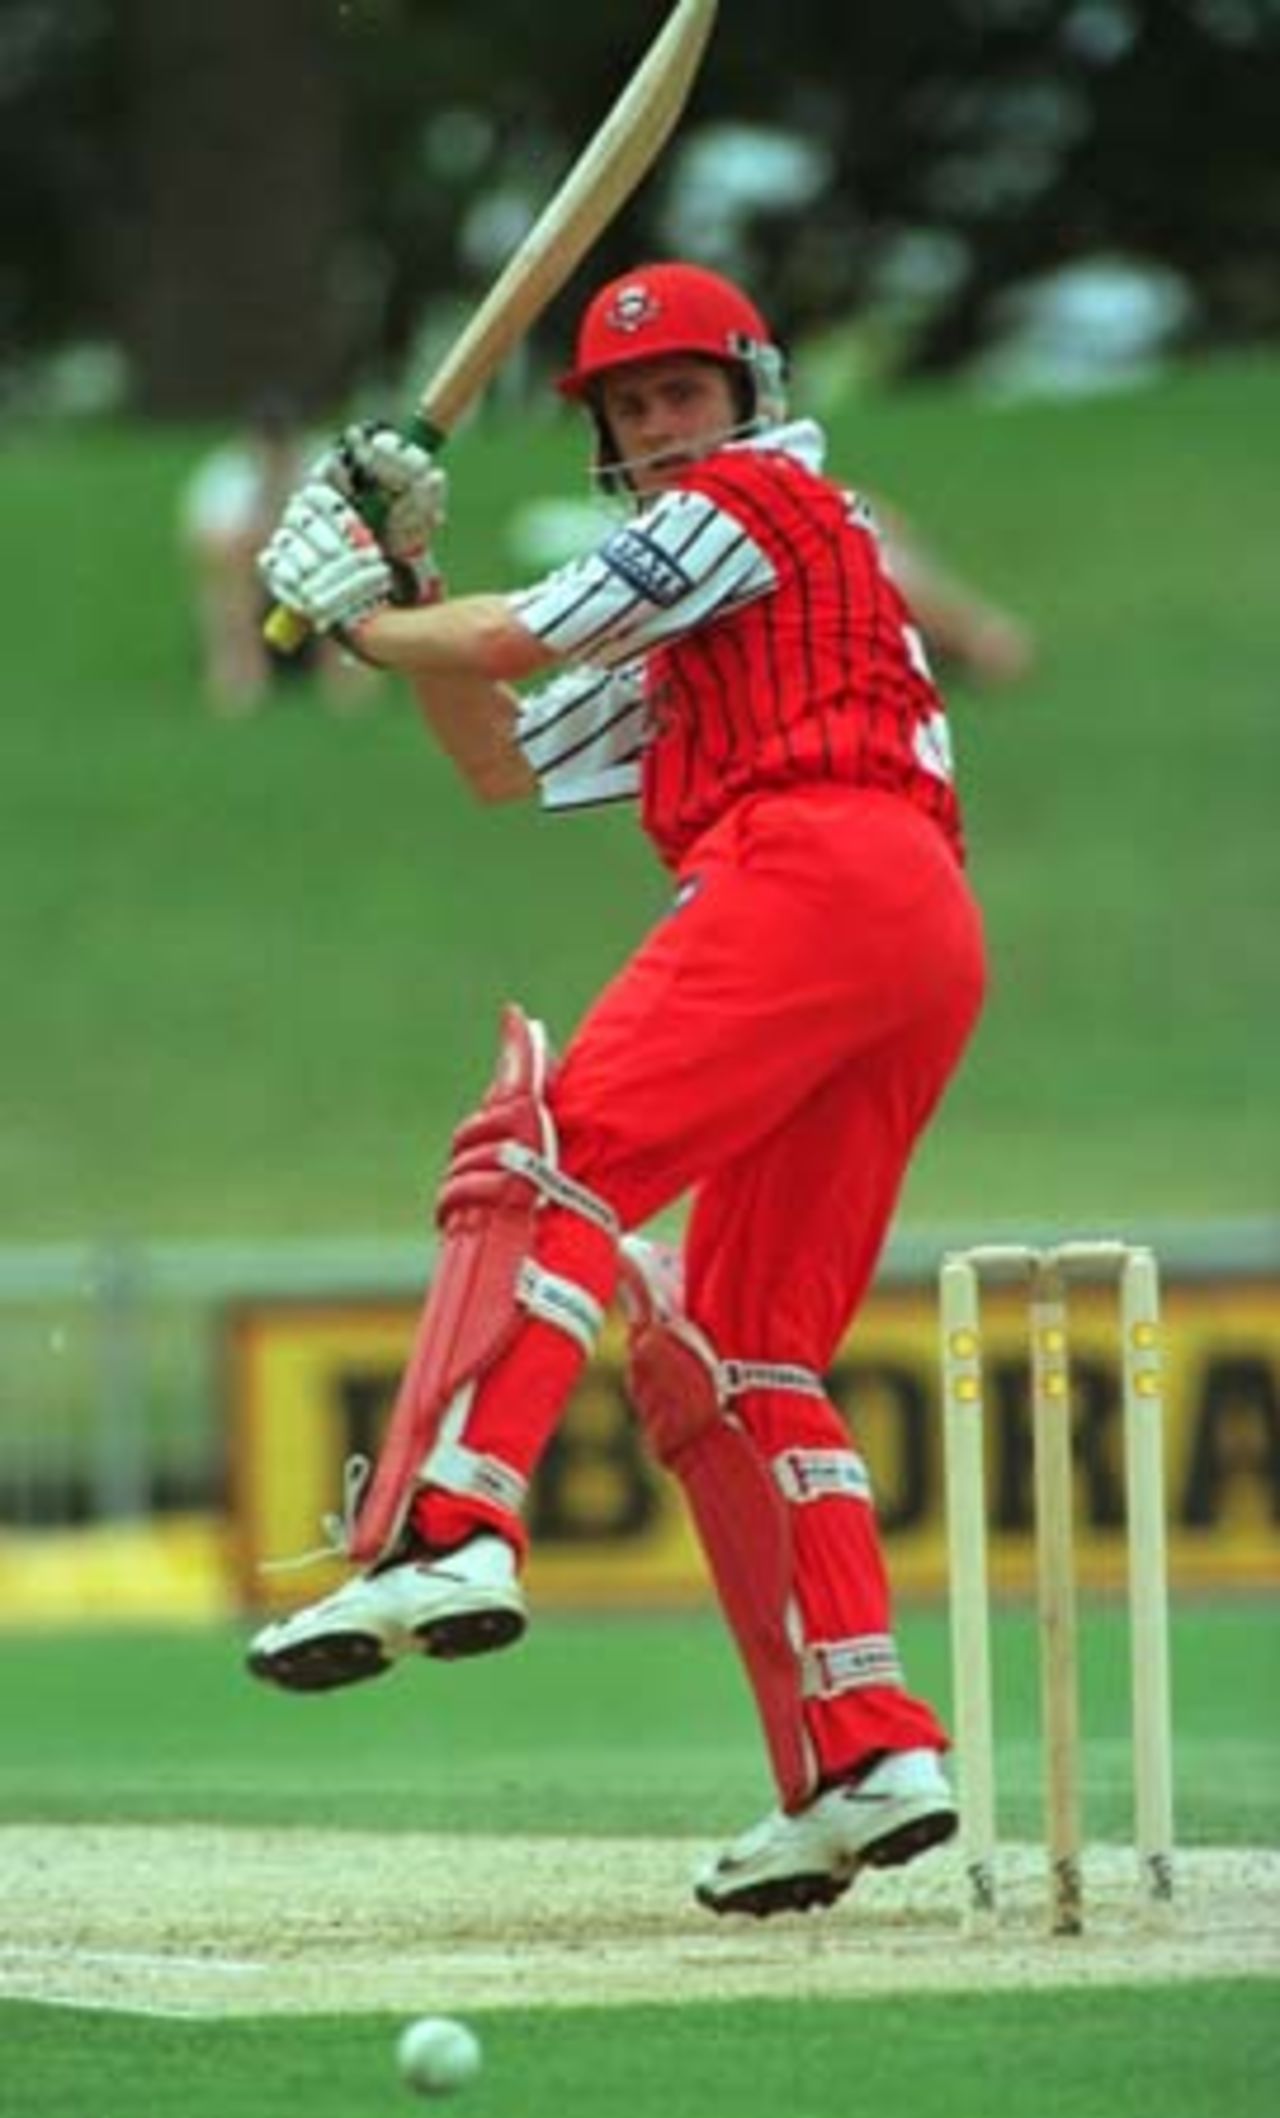 Canterbury batsman Aaron Redmond plays a leg glance during his innings of 12. 1st Shell Cup Final: Central Districts v Canterbury at McLean Park, Napier, 24 January 2001.